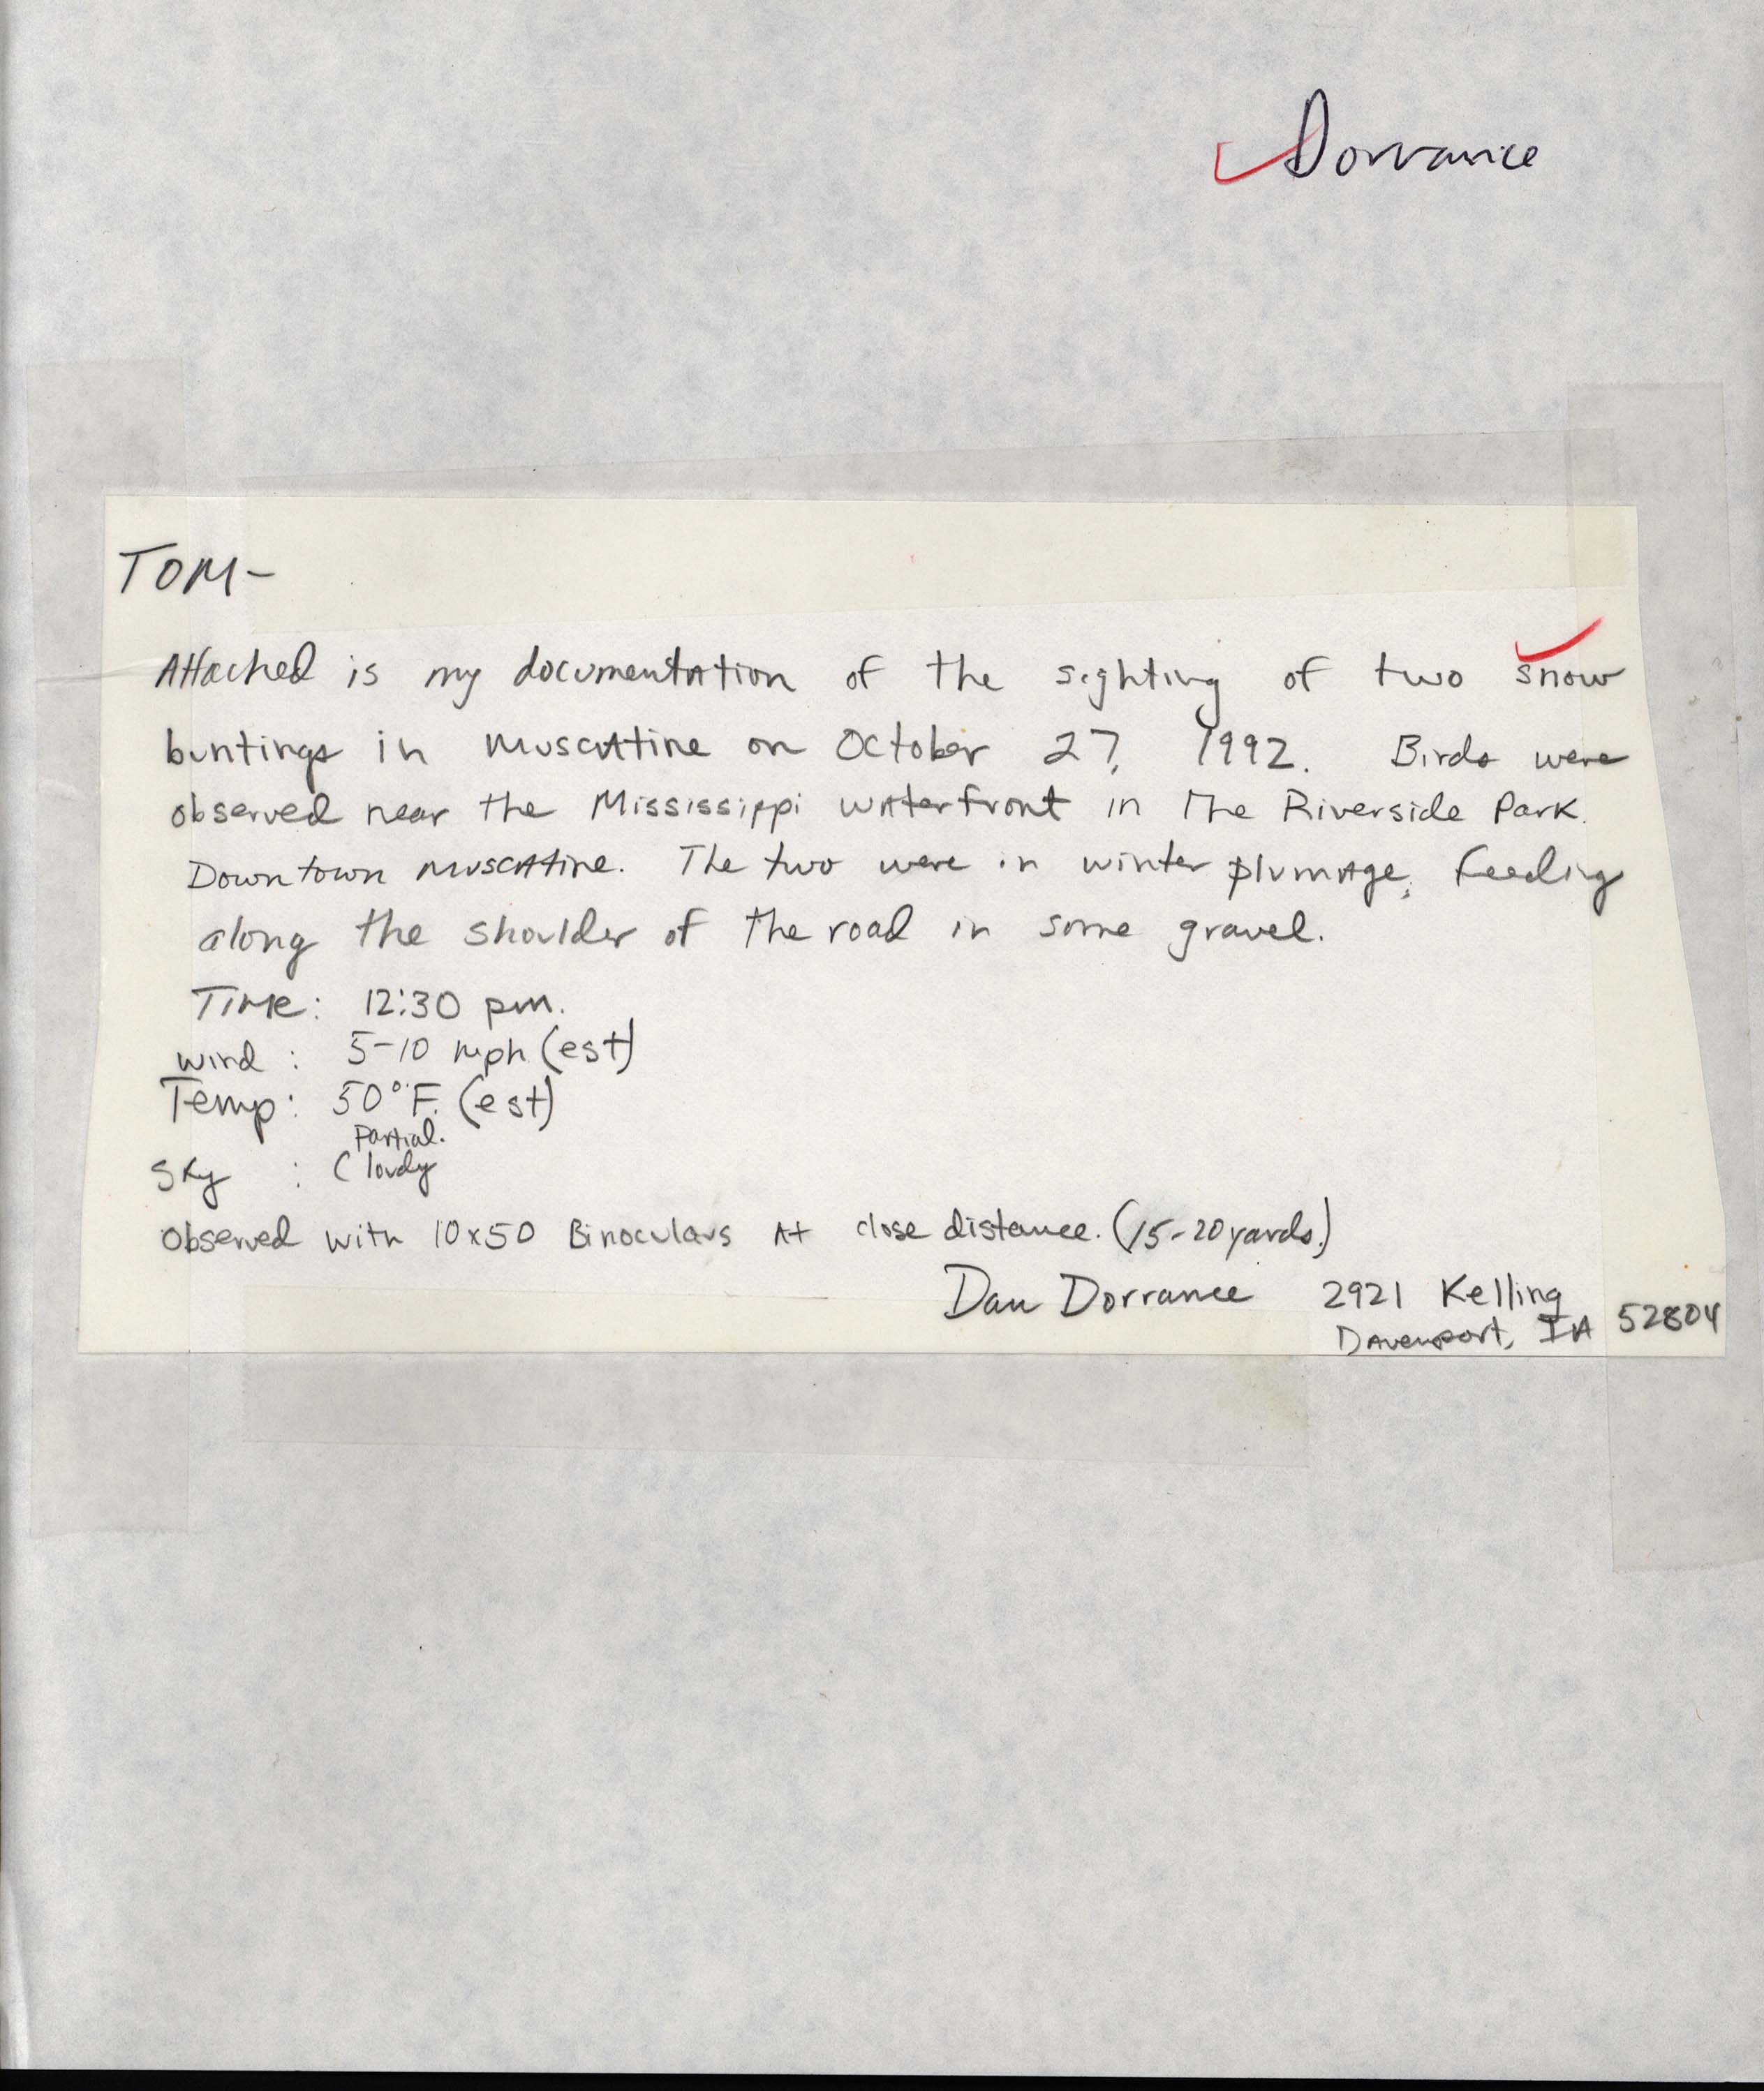 Field note about a Snow Bunting sighting contributed by Dan Dorrance, October 27, 1992